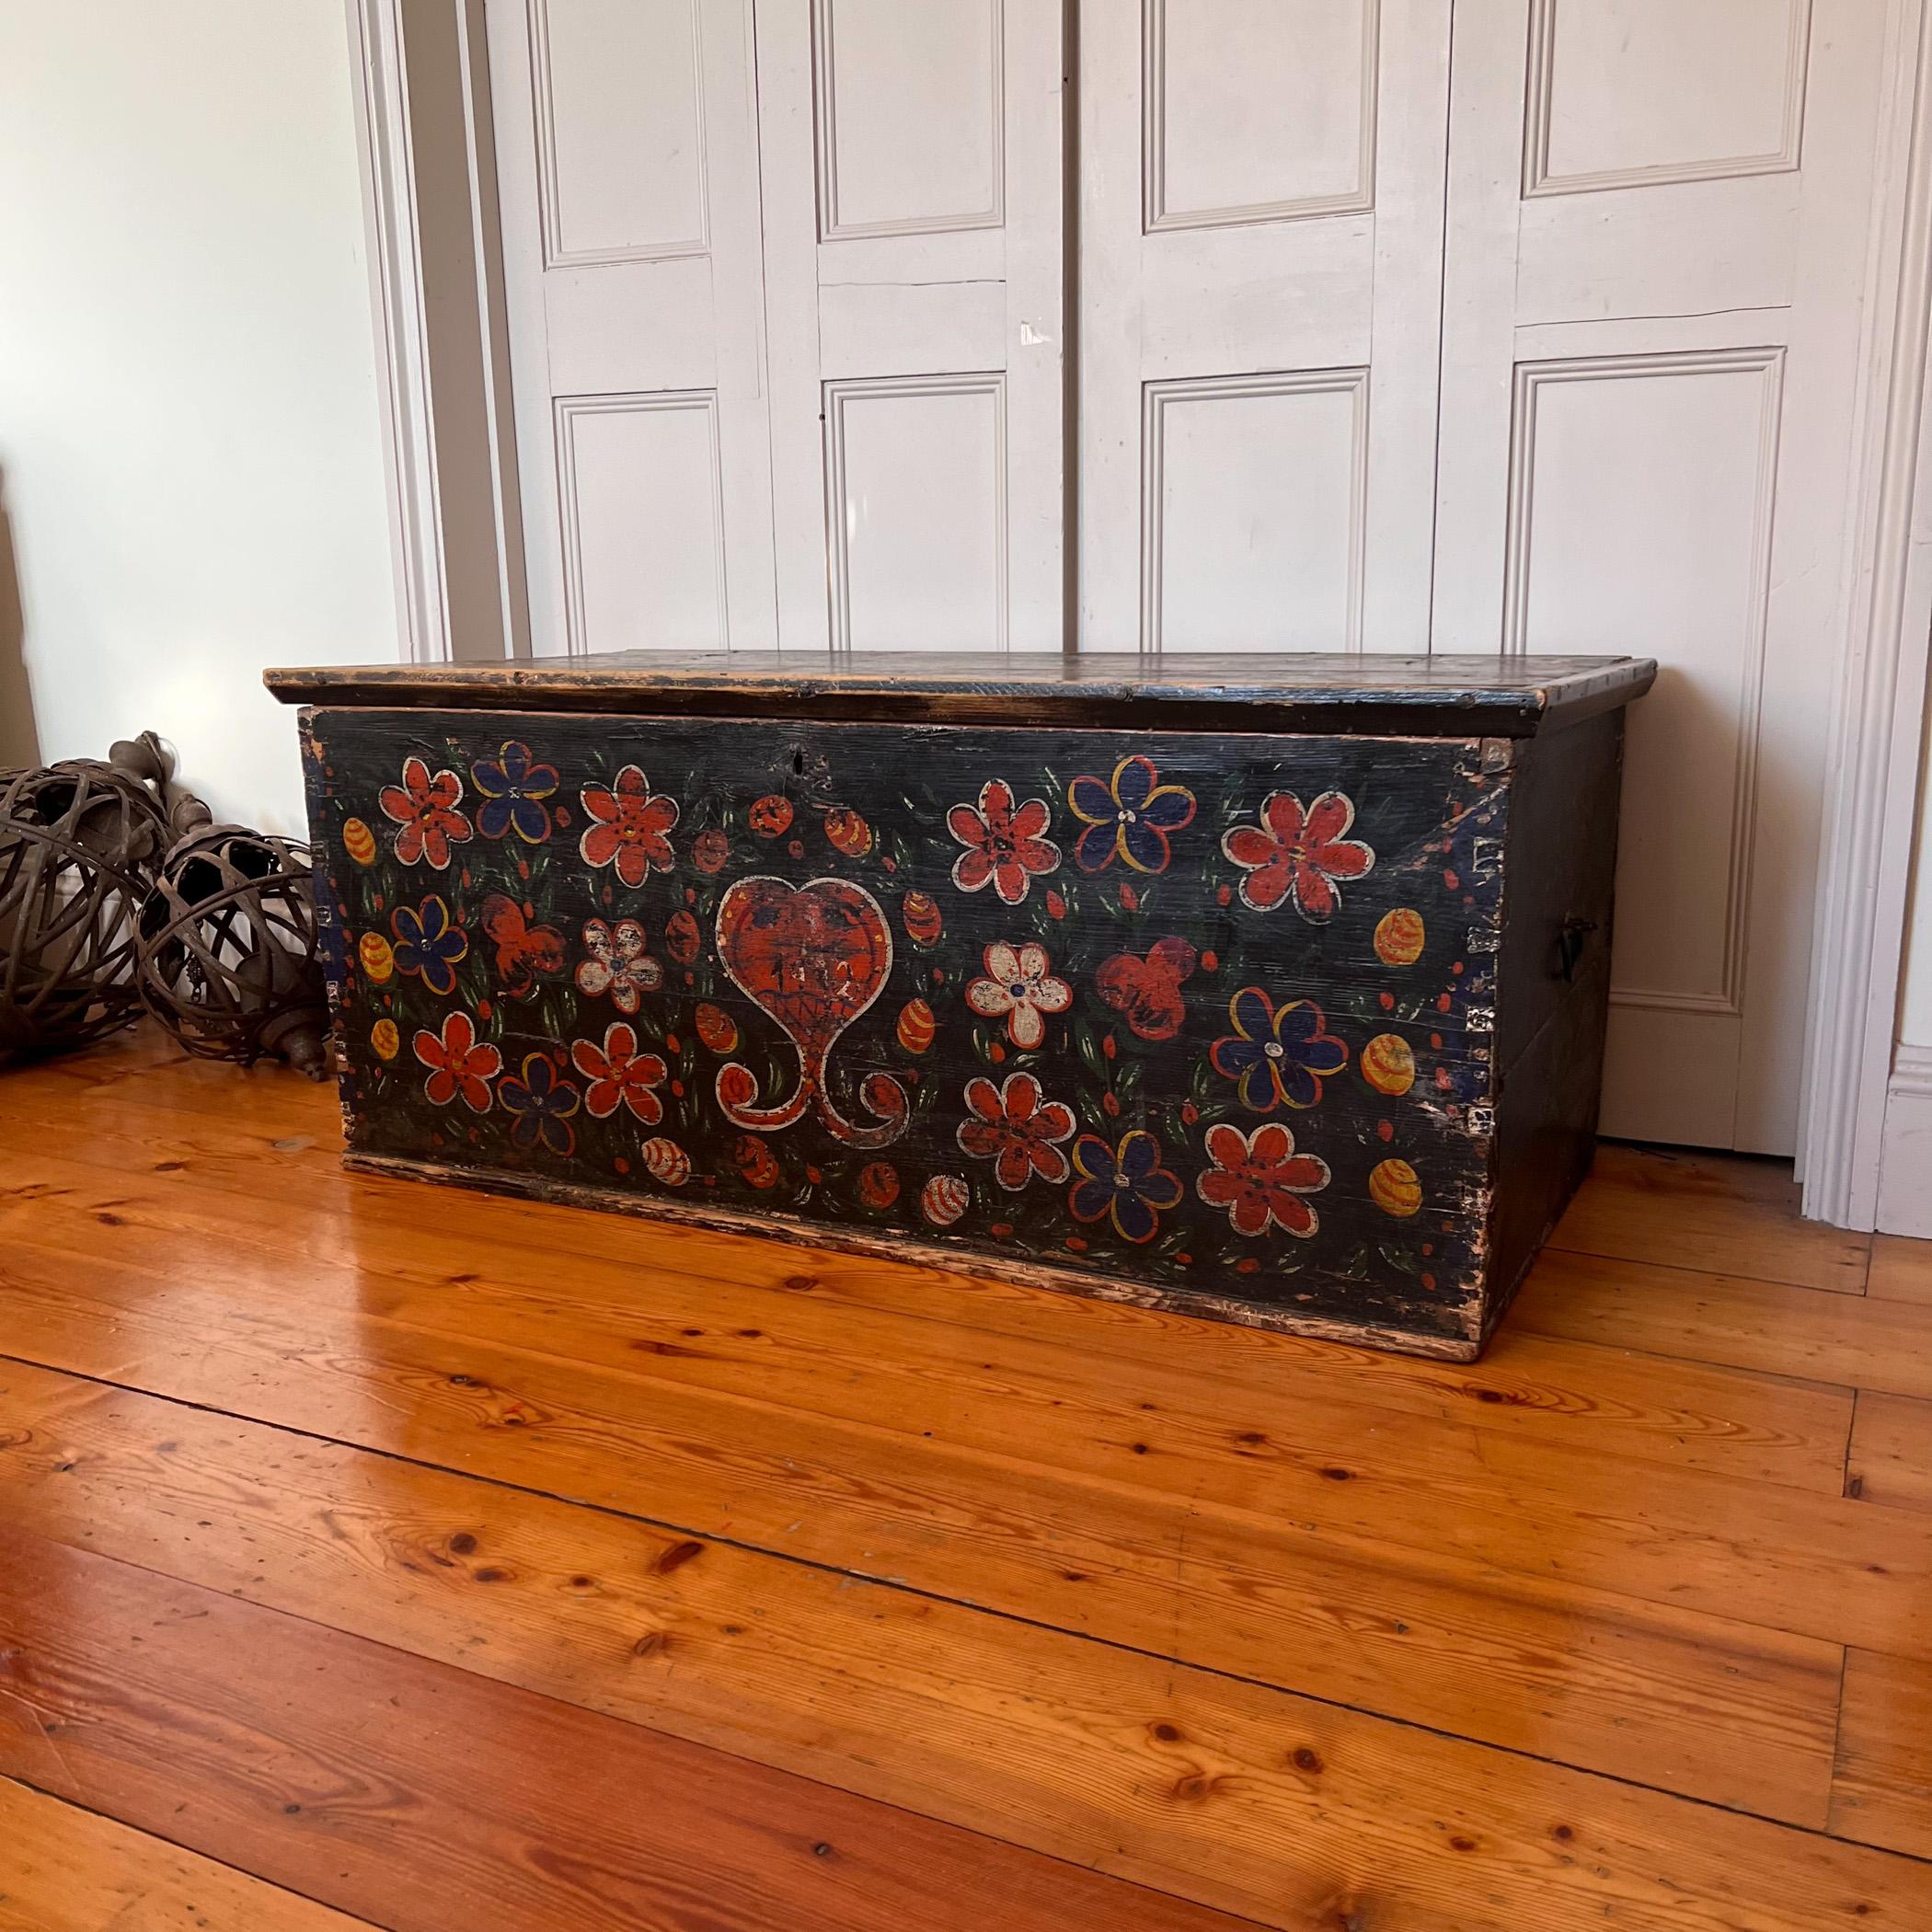 French Late 19 C Hand Painted Large Wooden Chest / Trunk from Brittany, France